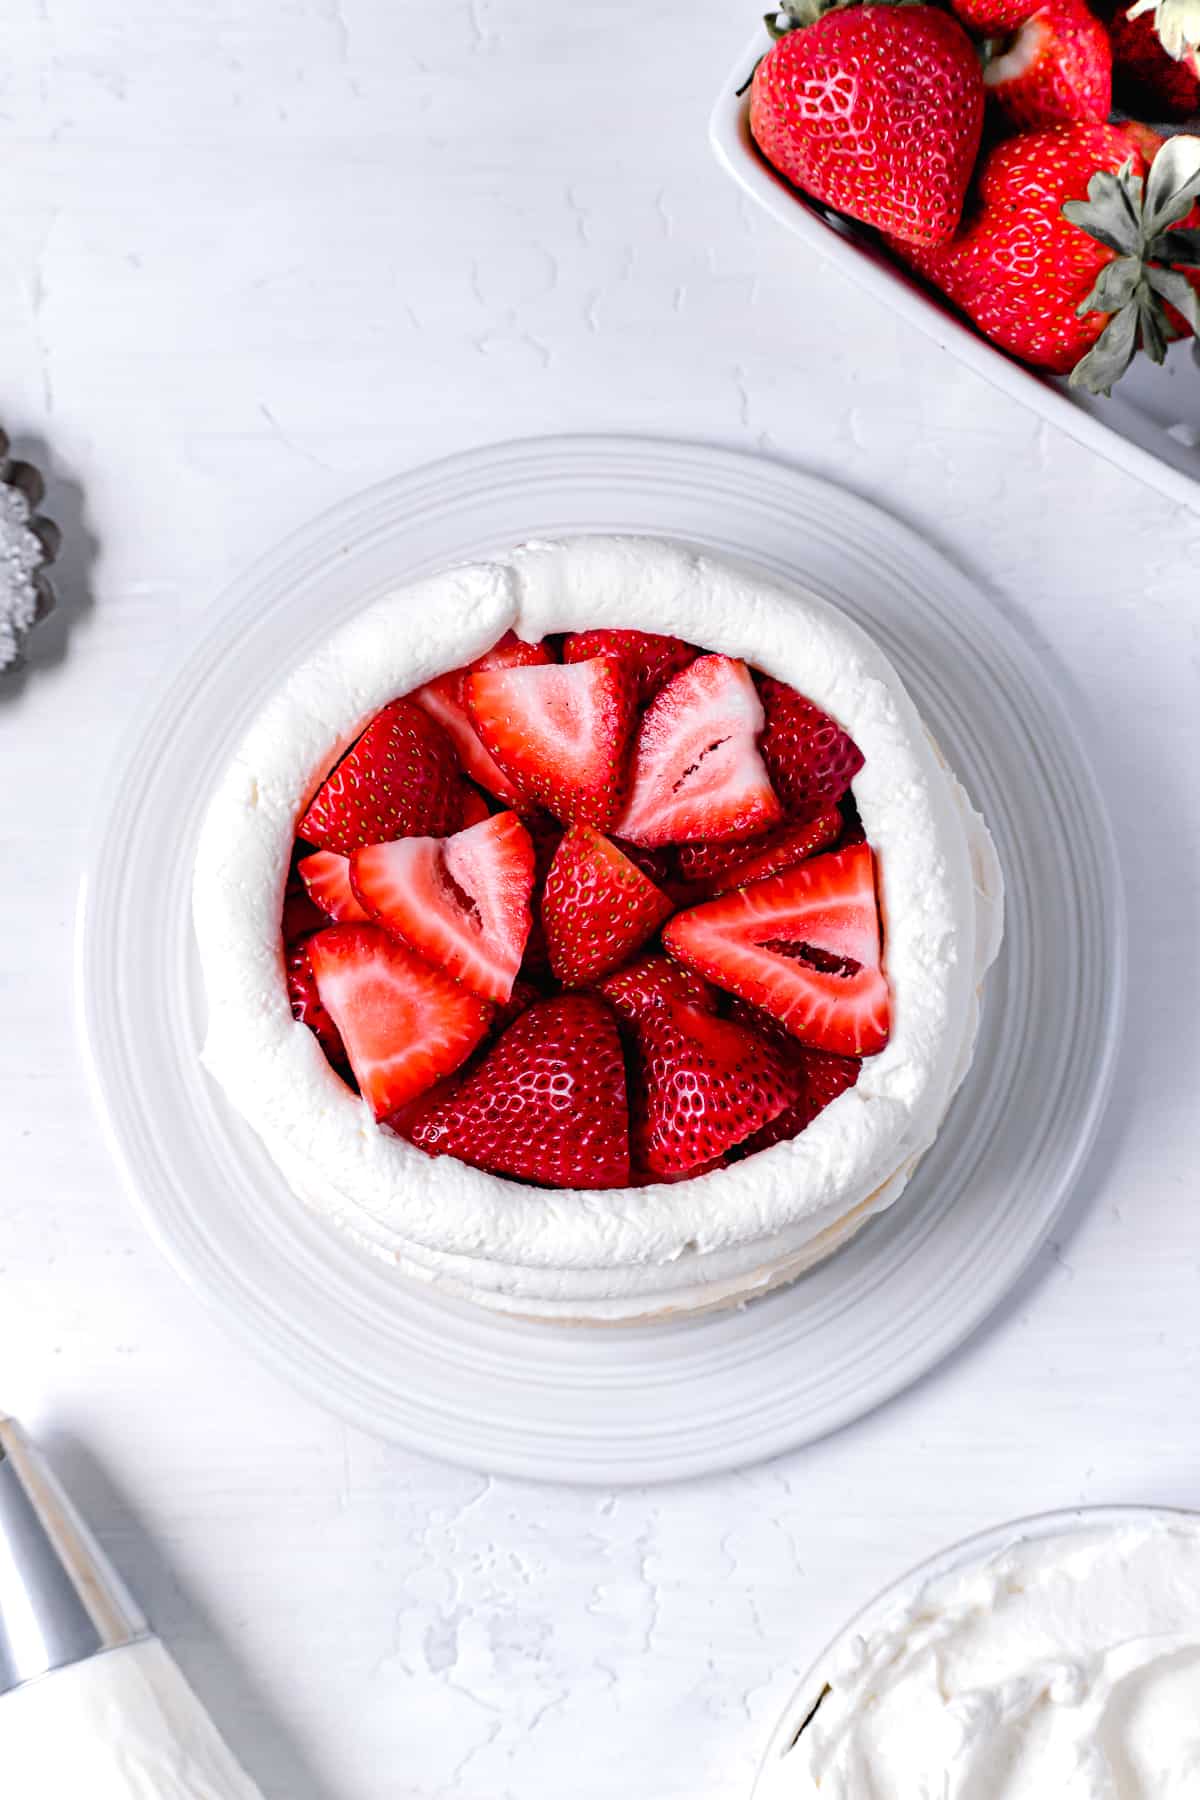 another layer of sliced strawberries layered in the middle of the cake.